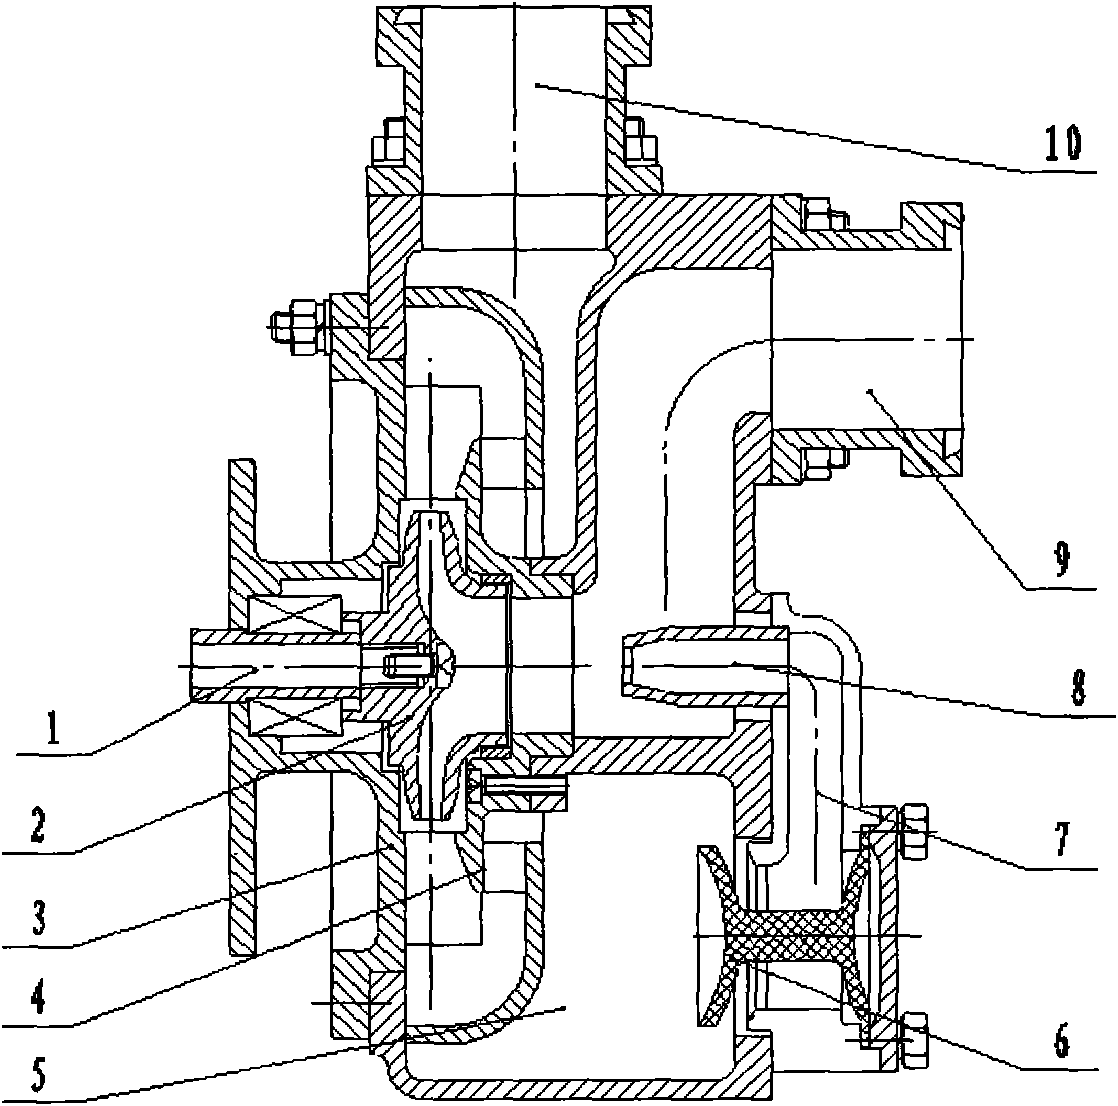 New structure of self-priming centrifugal pump